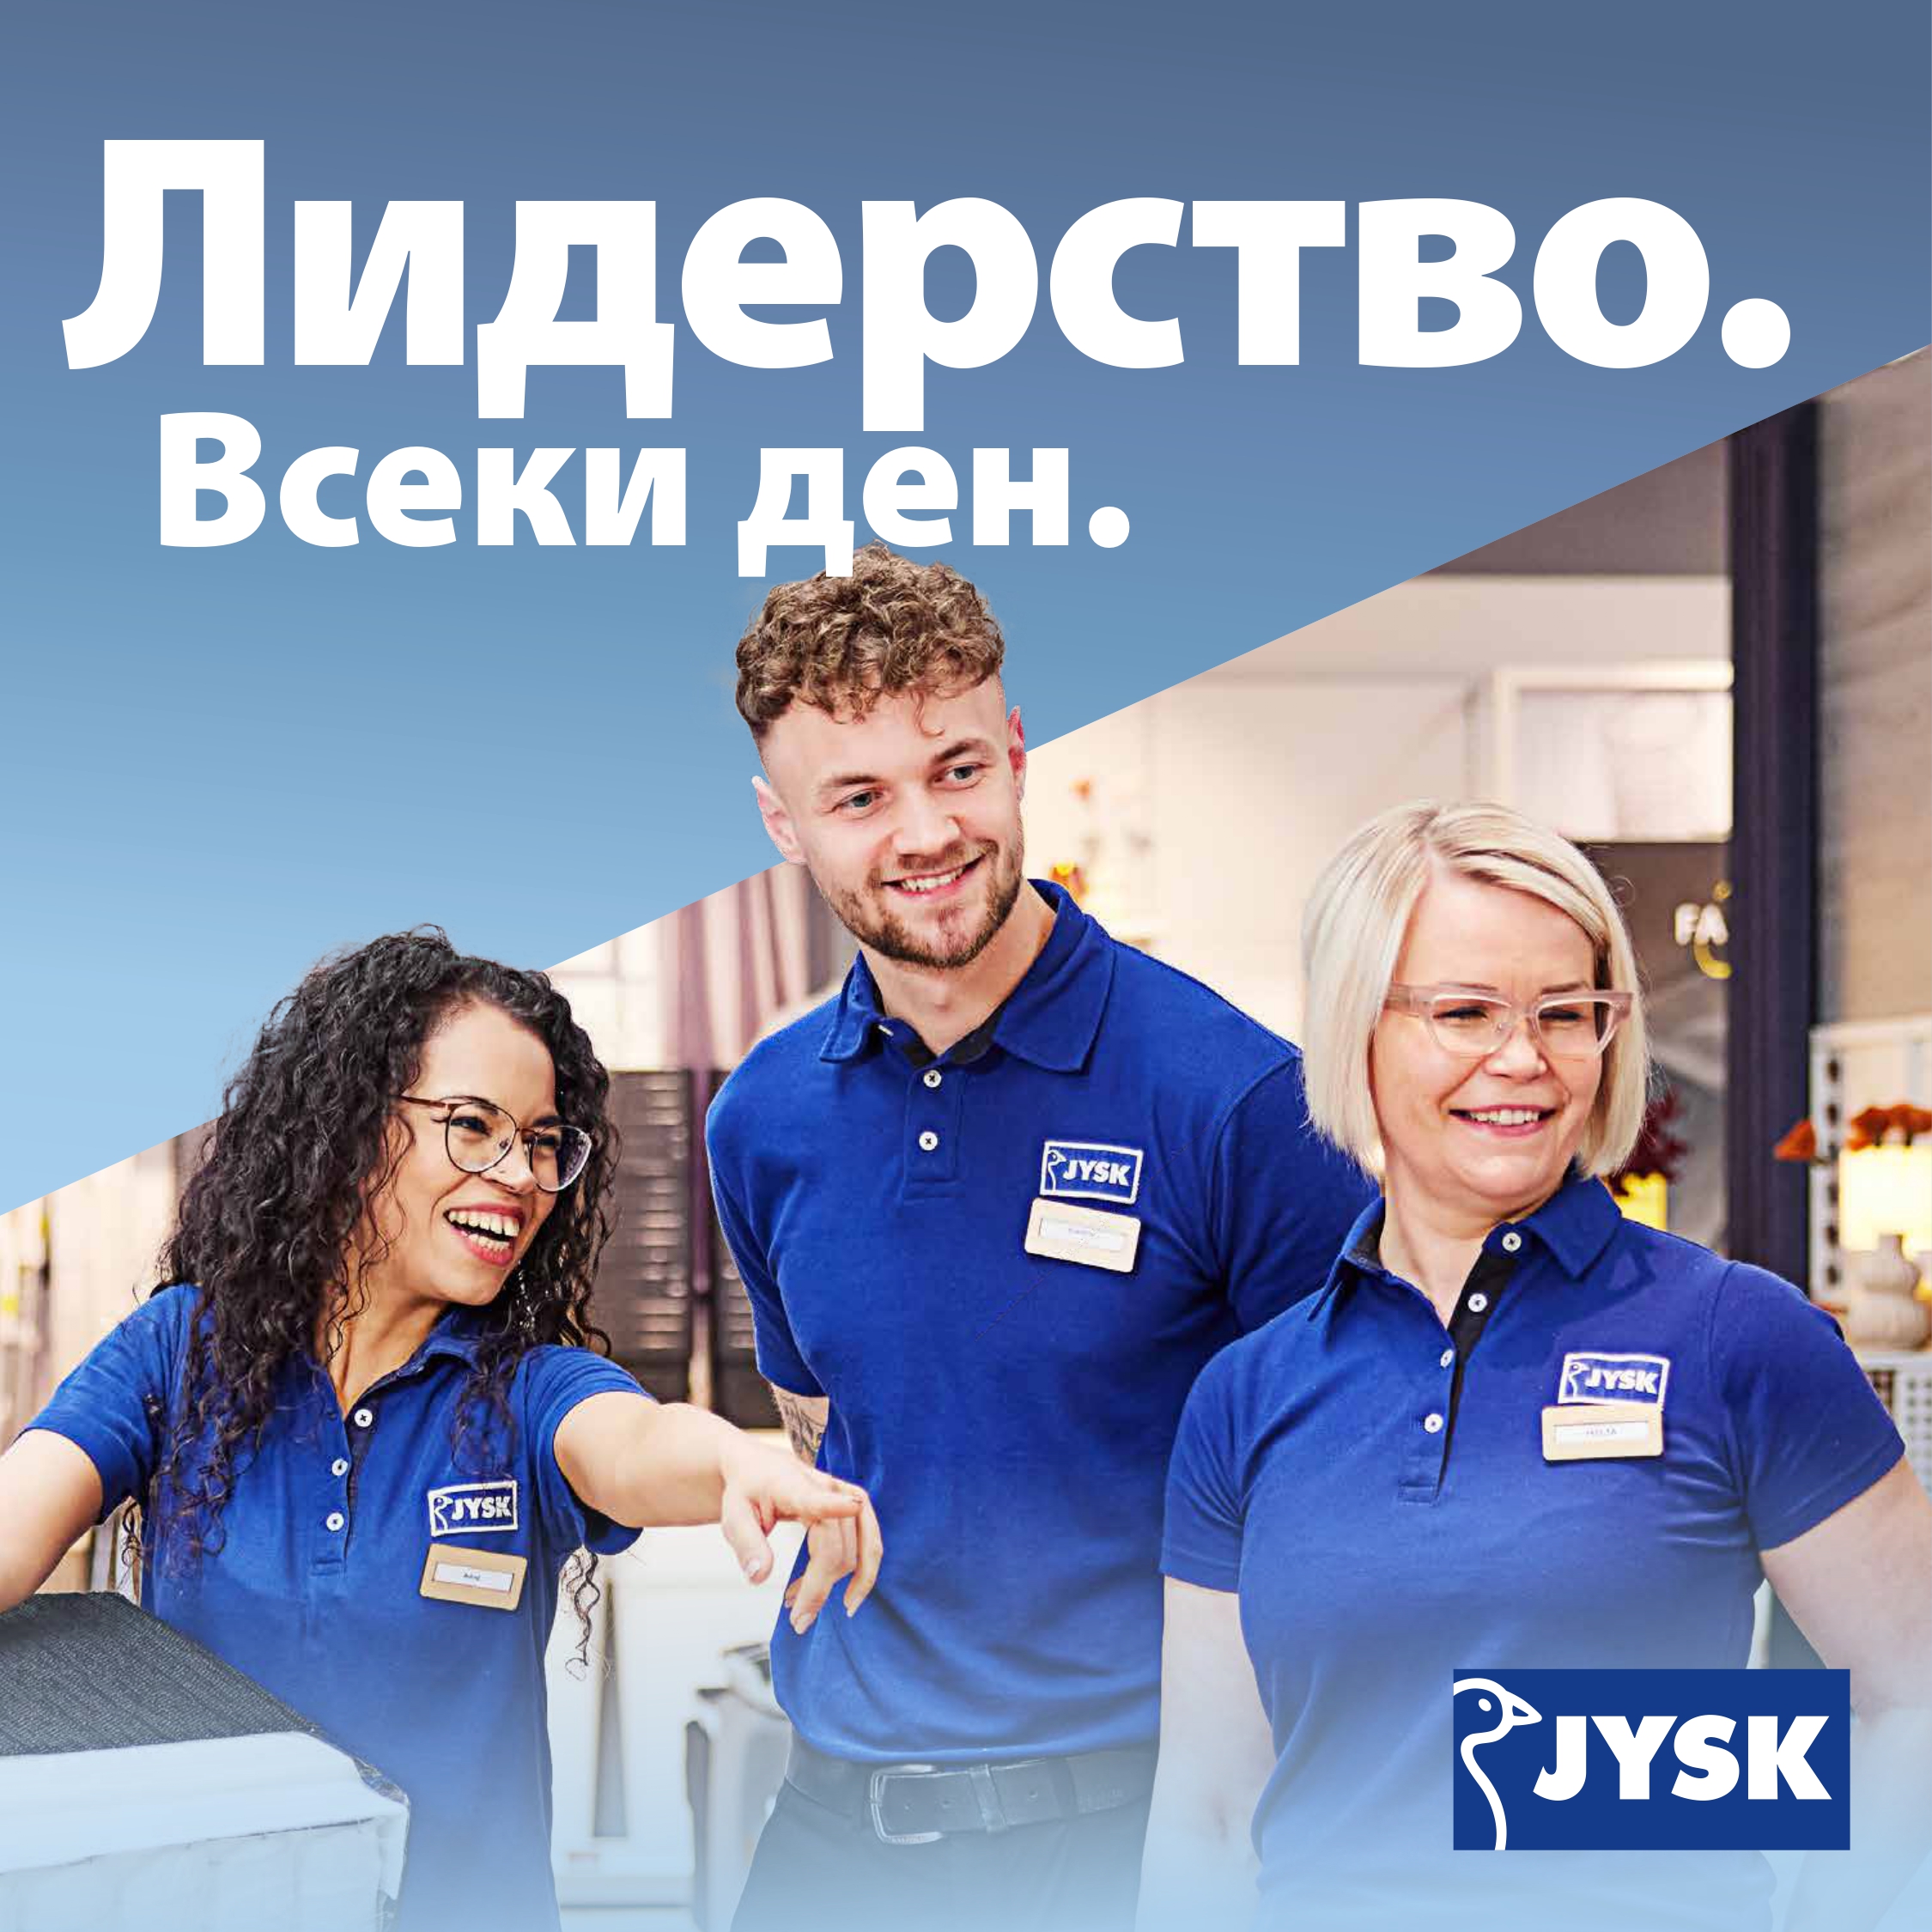 JBG - Store Manager Trainee